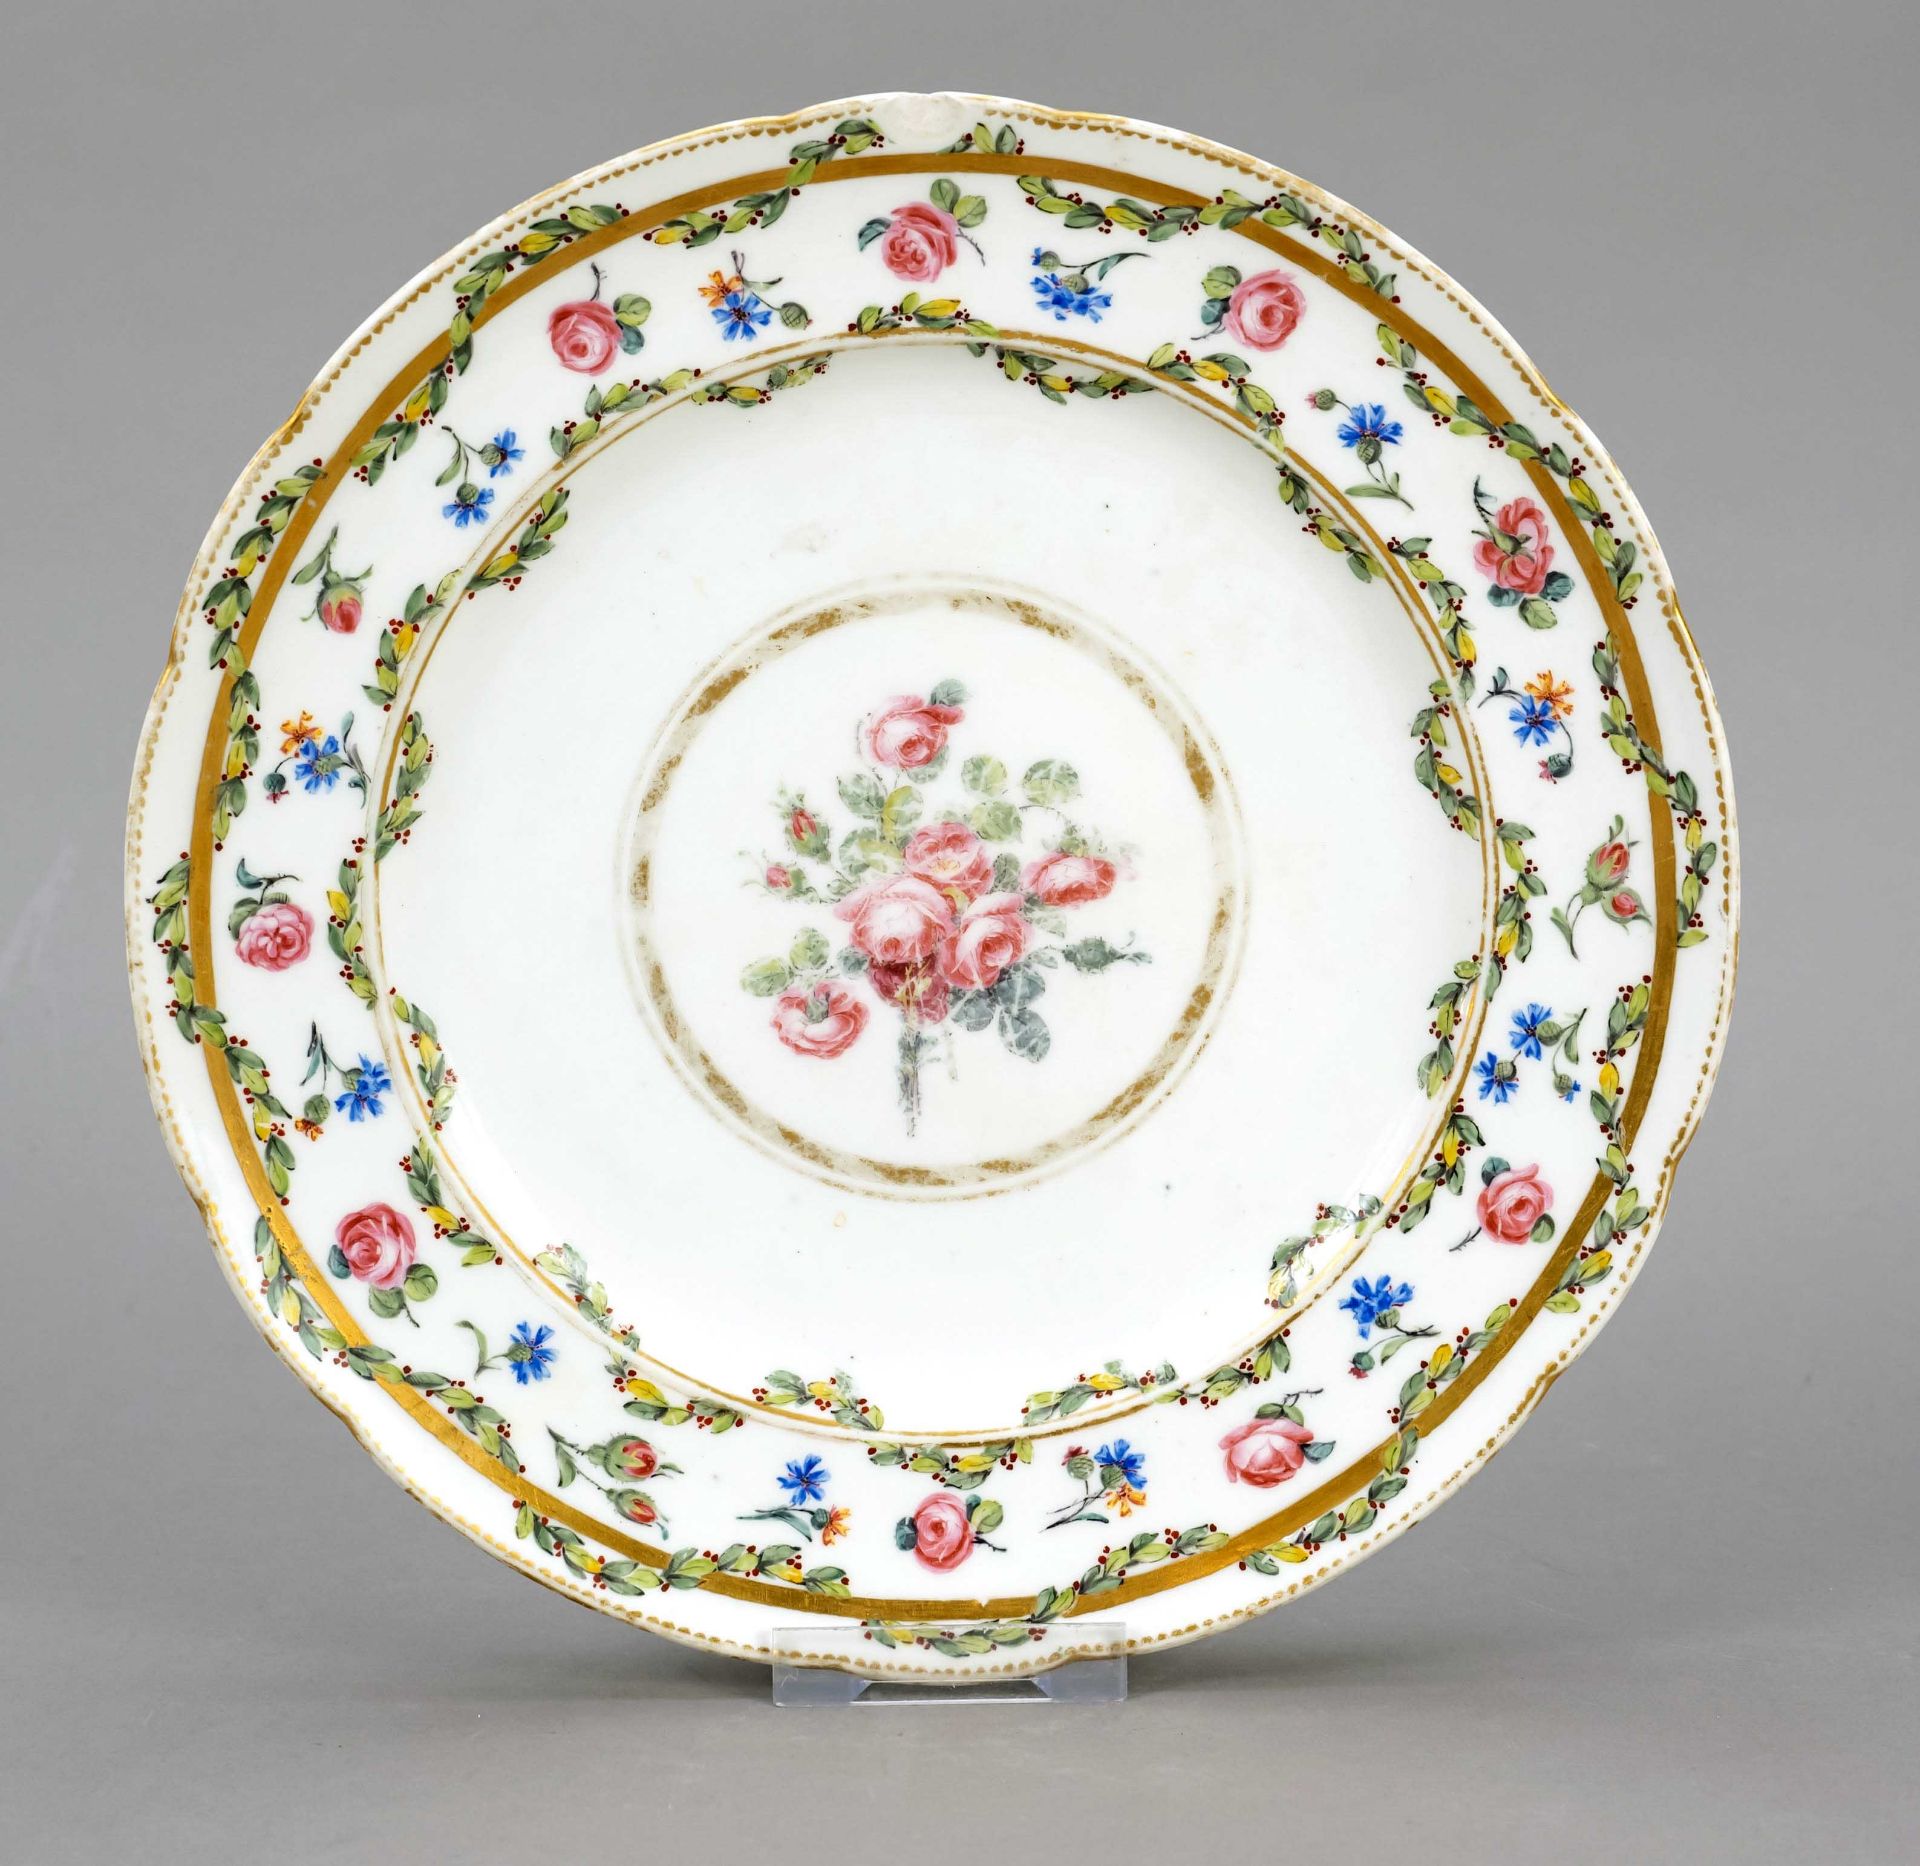 Flat plate, Sevres, France, 18th century, polychrome painting, painter's mark for Vincent